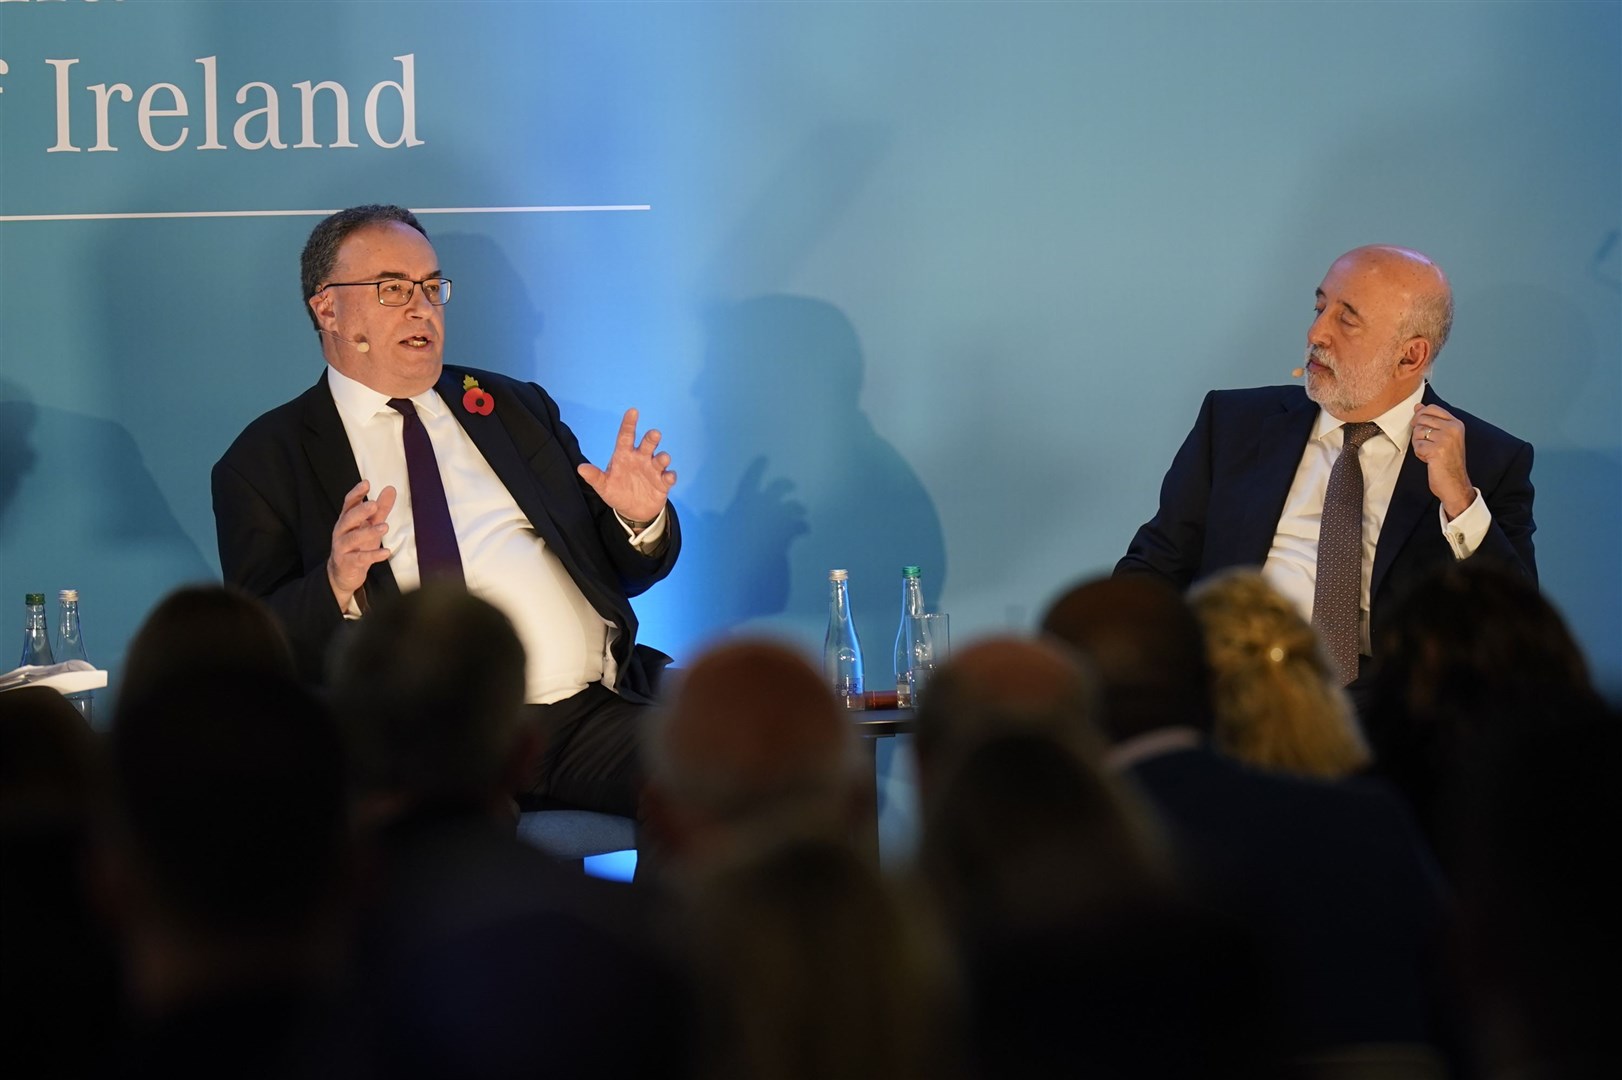 Bank of England governor Andrew Bailey, left, and governor of the Central Bank of Ireland Gabriel Makhlouf speaking at the Central Bank of Ireland Financial System Conference at the Aviva Stadium in Dublin (Niall Carson/PA)